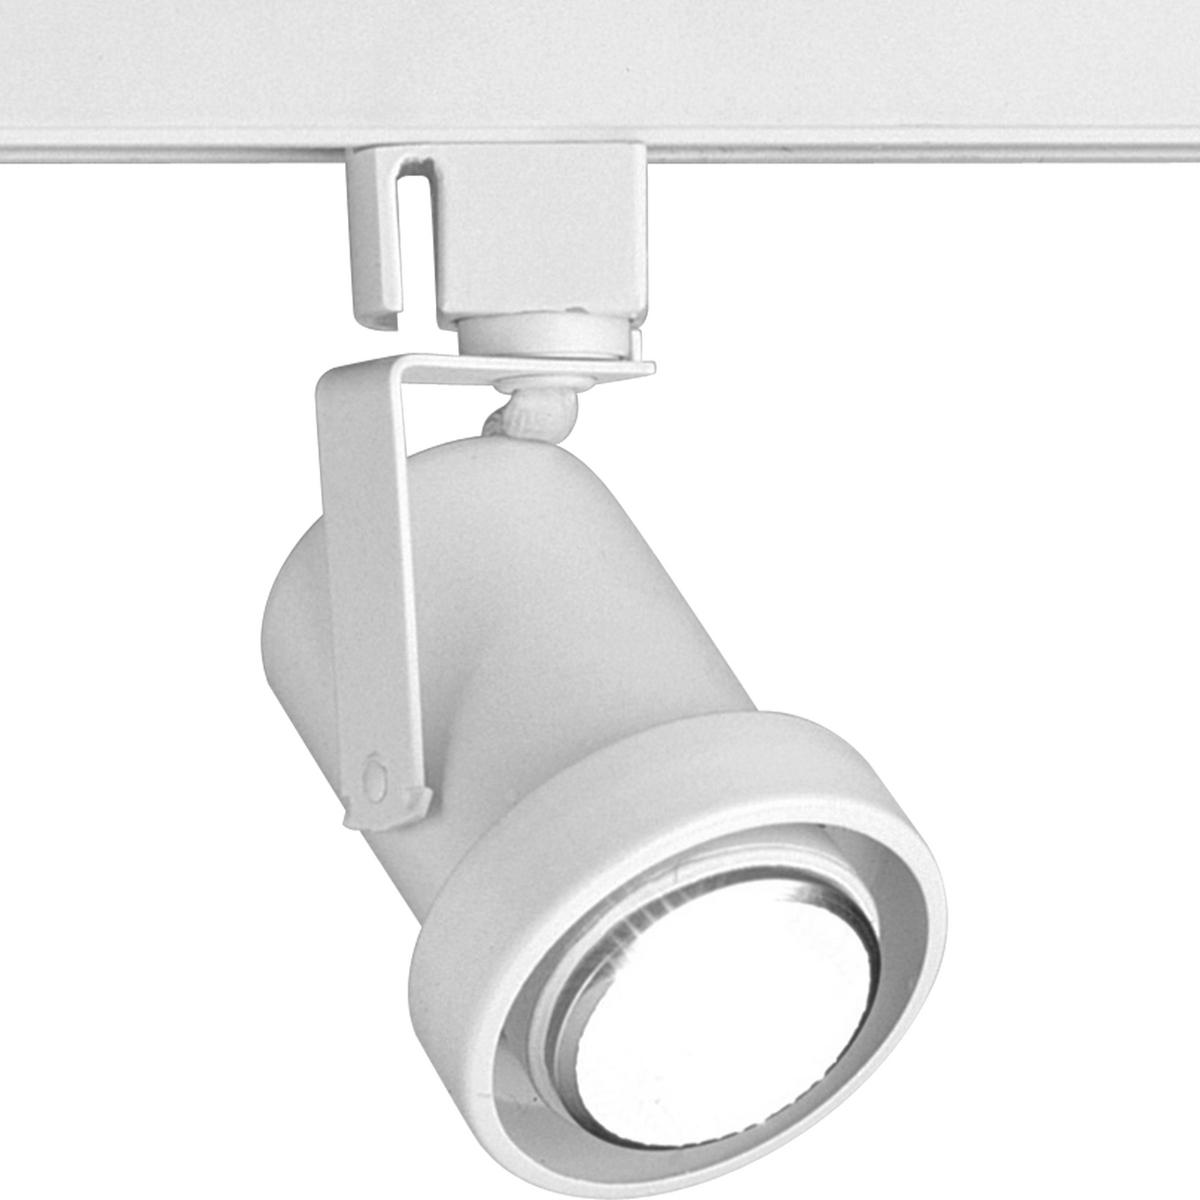 Hubbell P6325-28 White high tech Alpha Trak track head with 360 degree horizontal rotation and 90 degree vertical rotation. Heads can be easily repositioned on the track to provide lighting in different areas of the room. Excellent for both residential and retail location